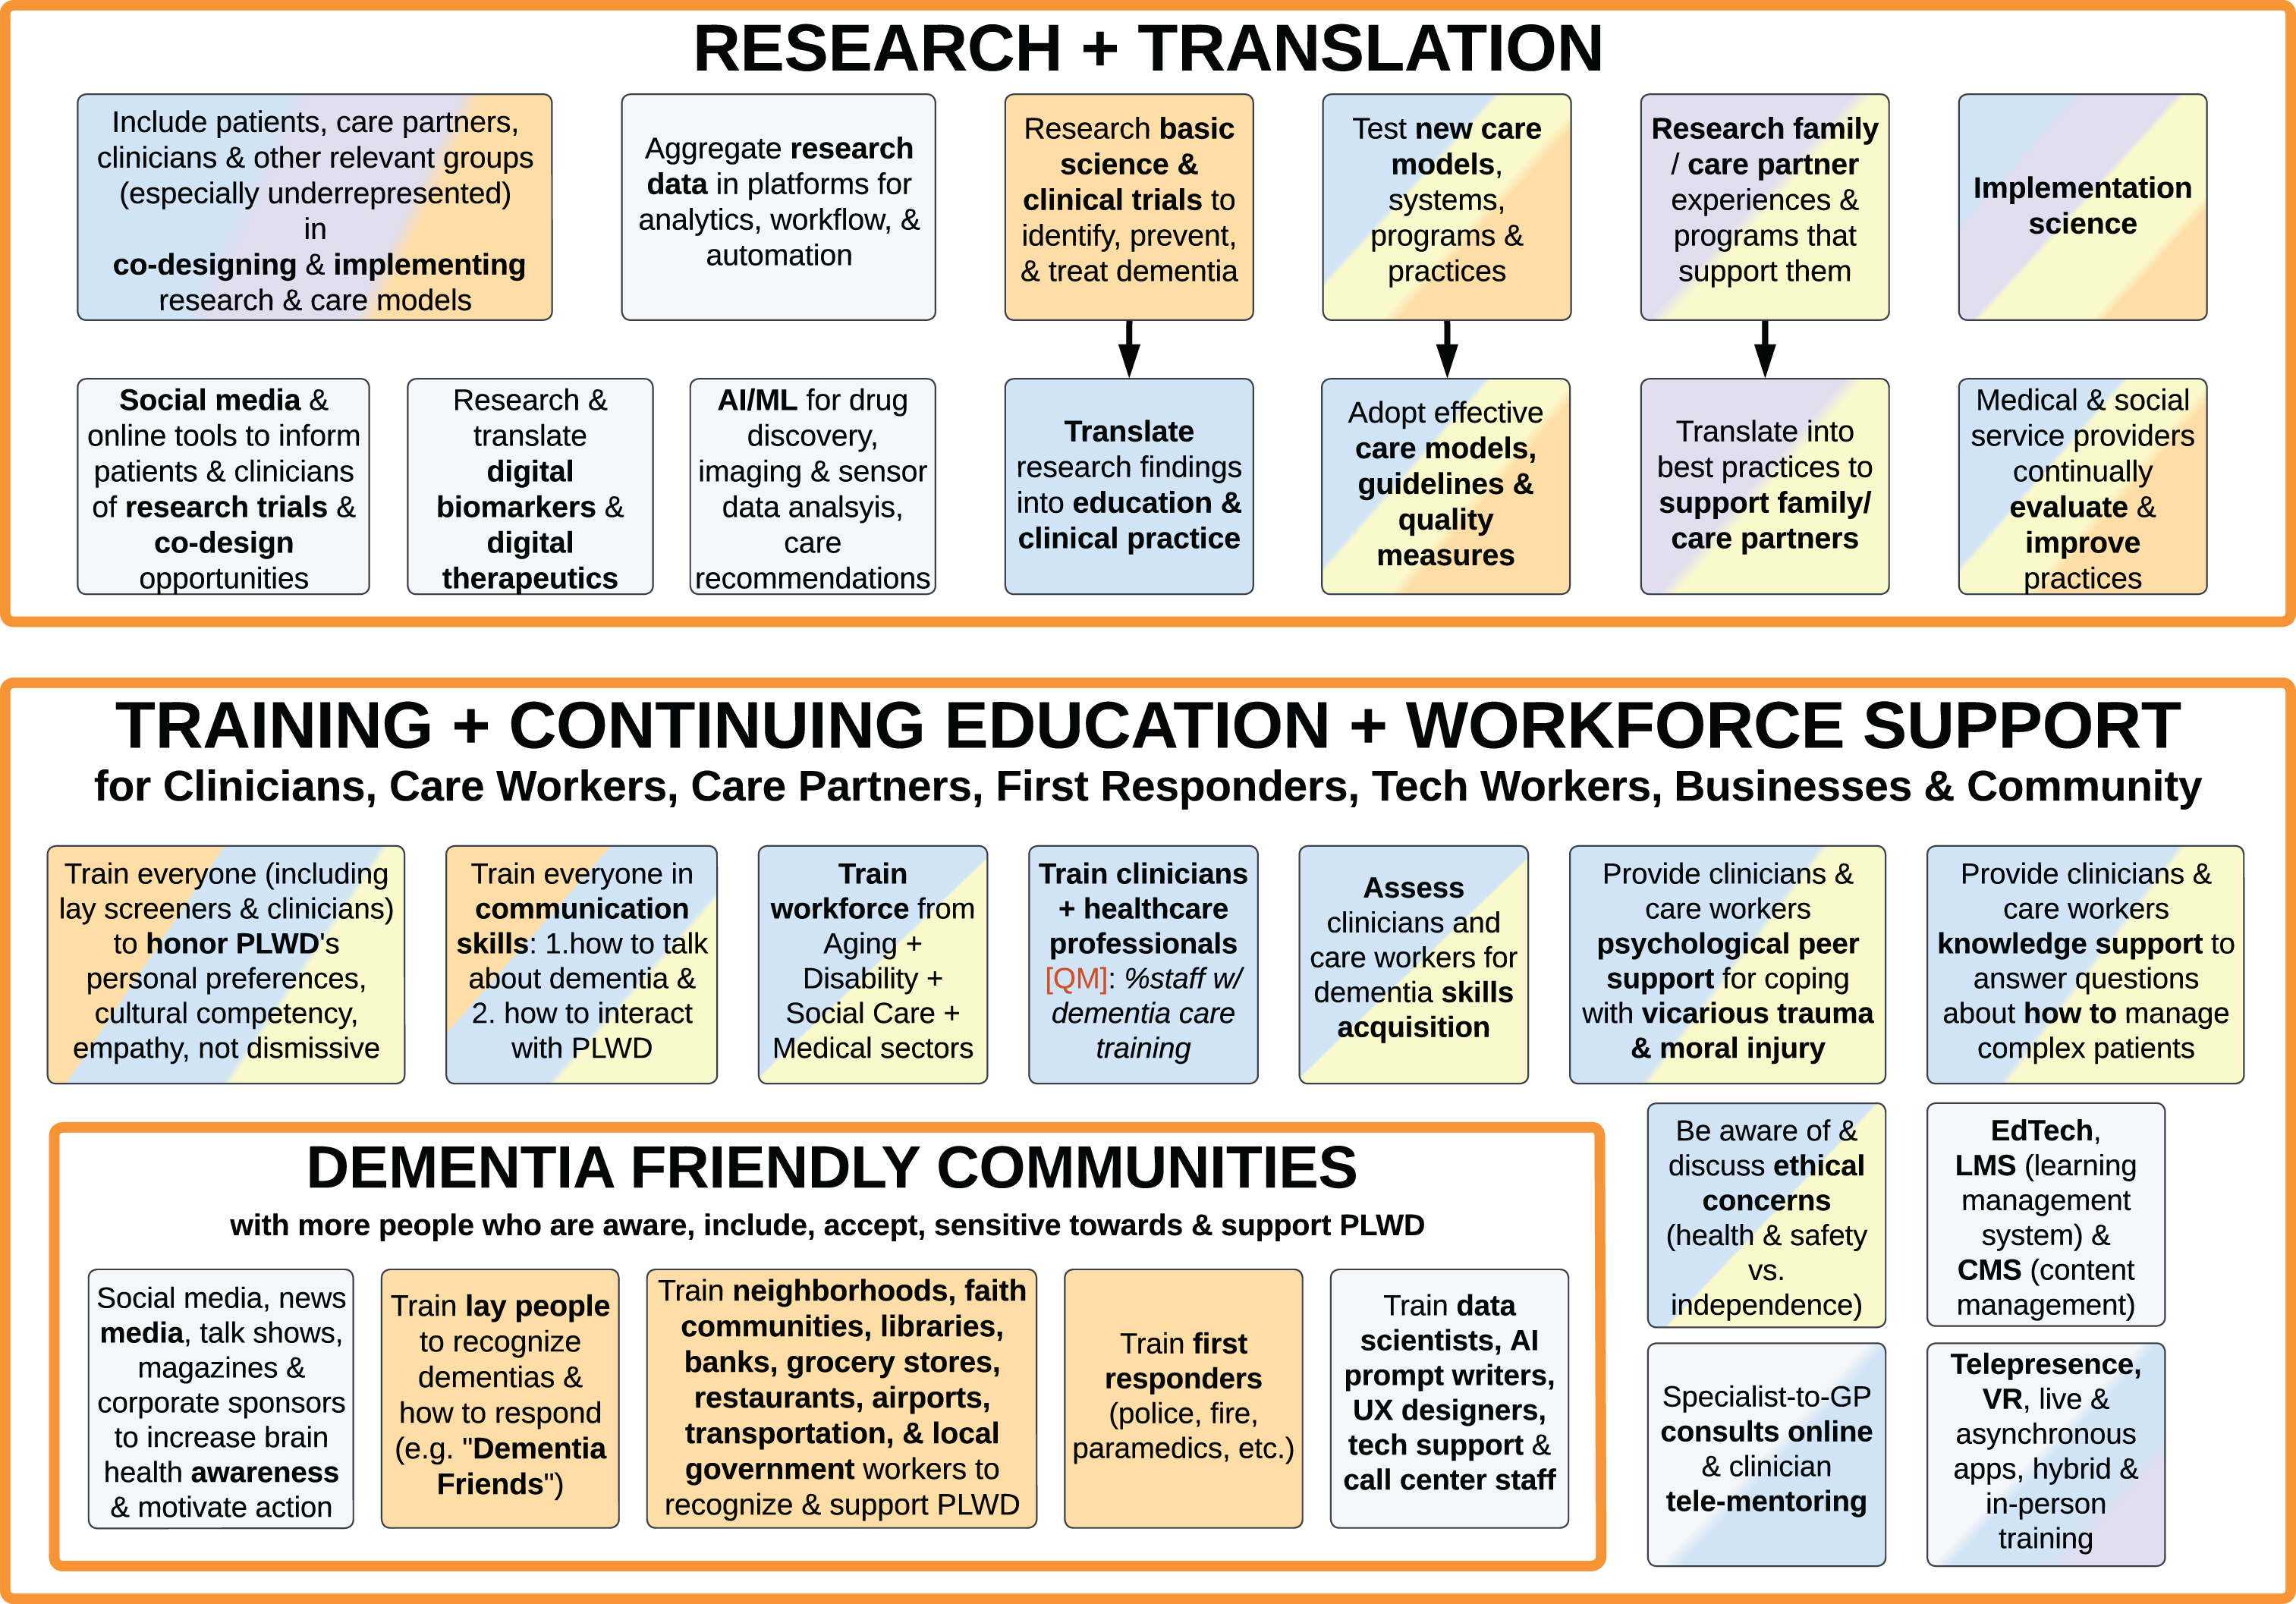 Foundational Infrastructure and Enablers of Ideal Care: Research and Translation (top); Training, Continuing Education, and Workforce Support (bottom).